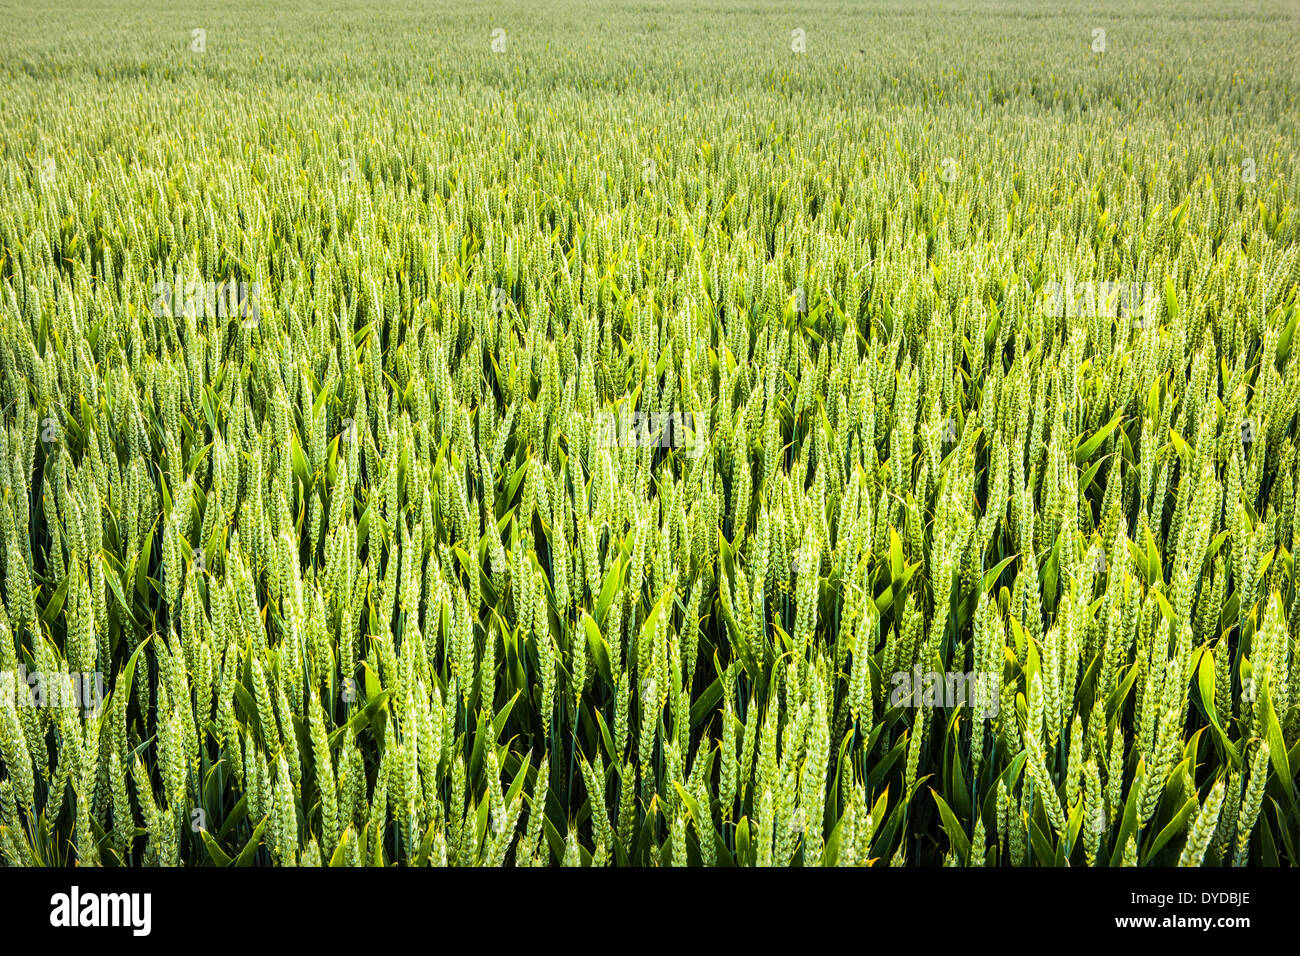 A field of wheat ready to ripen for harvest. Stock Photo